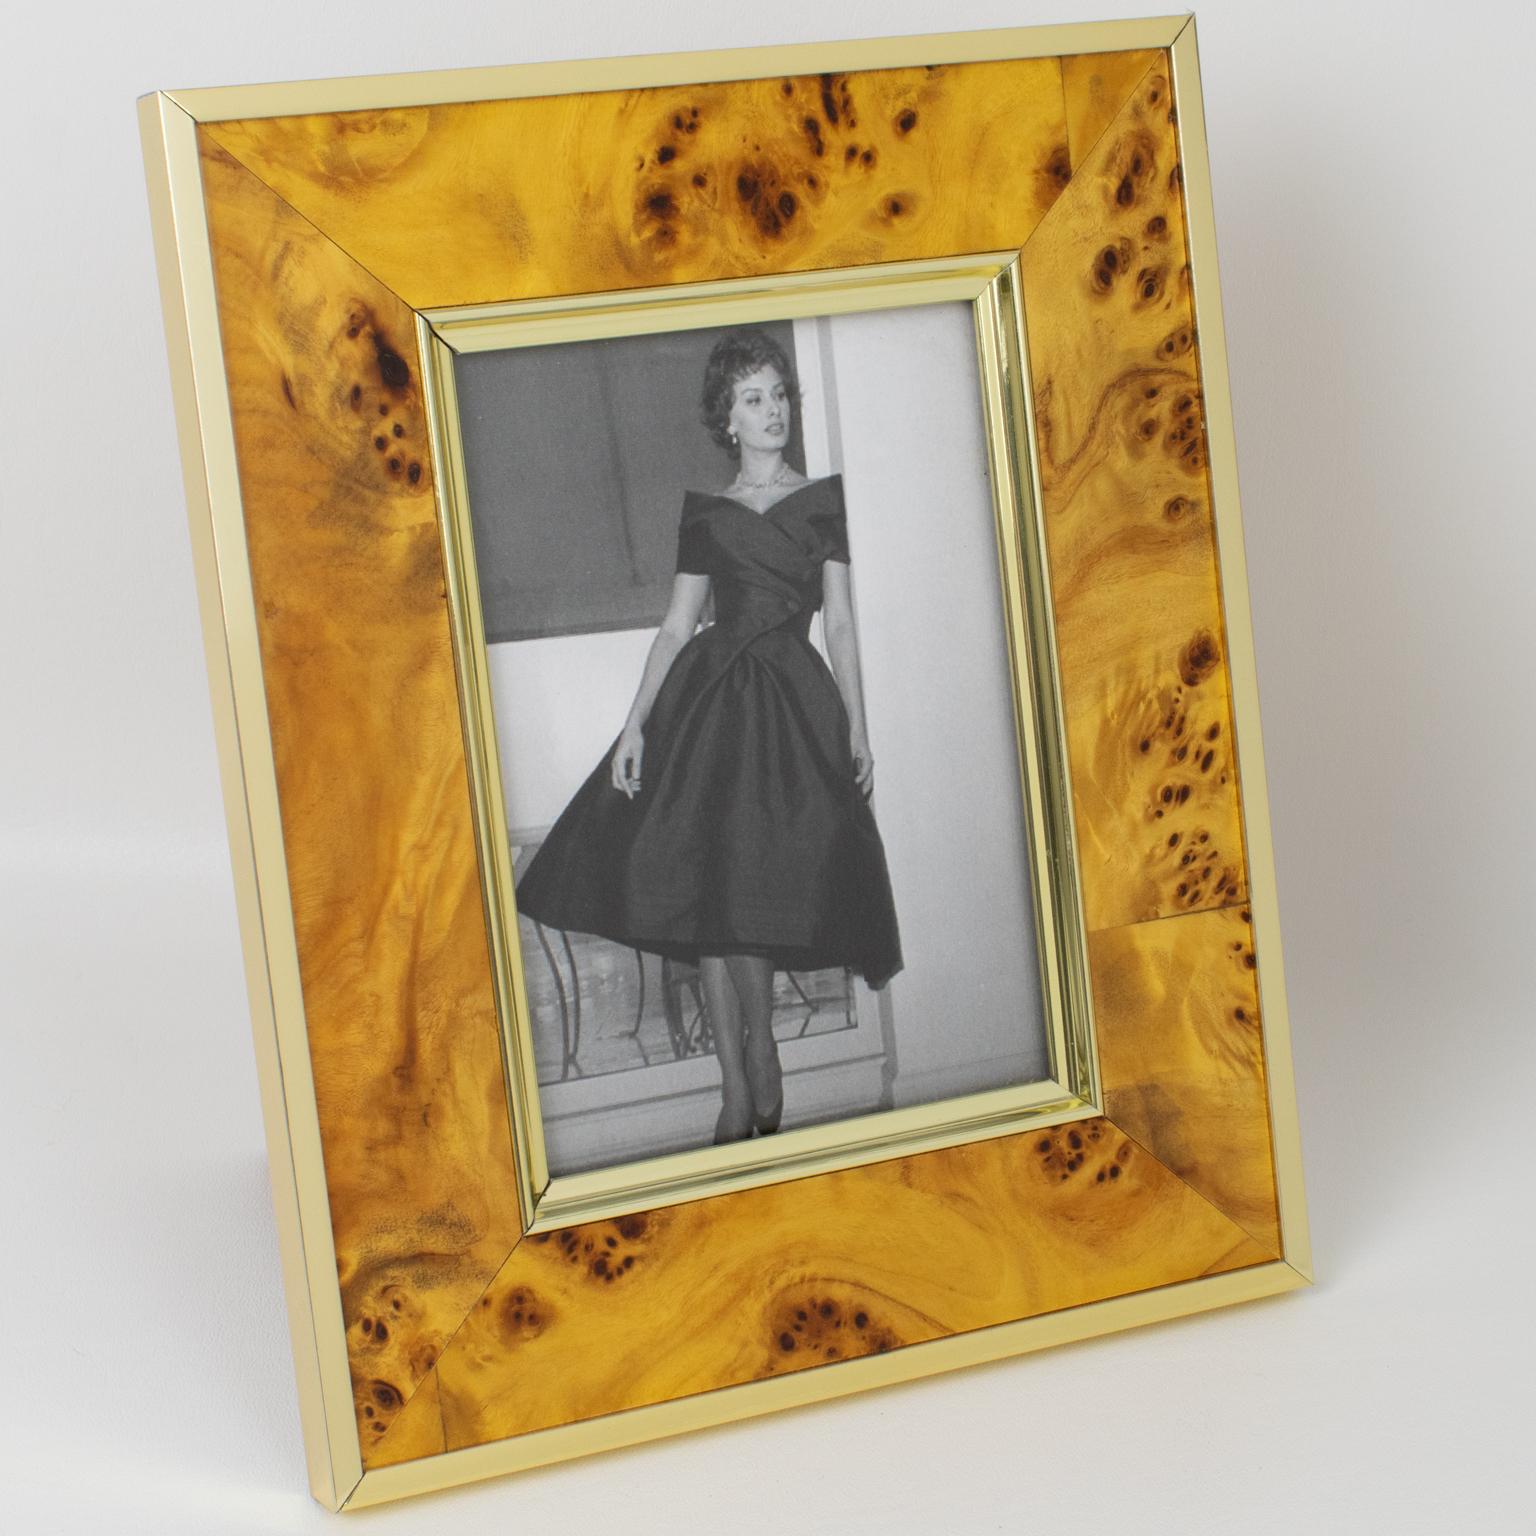 Montagnani Firenze, Italy, crafted this stunning picture photo frame in the 1970s. Its Mid-Century modernist design boasts a rectangular shape, with light burl walnut wood geometric veneer complimented with polished gilded aluminum metal framings.